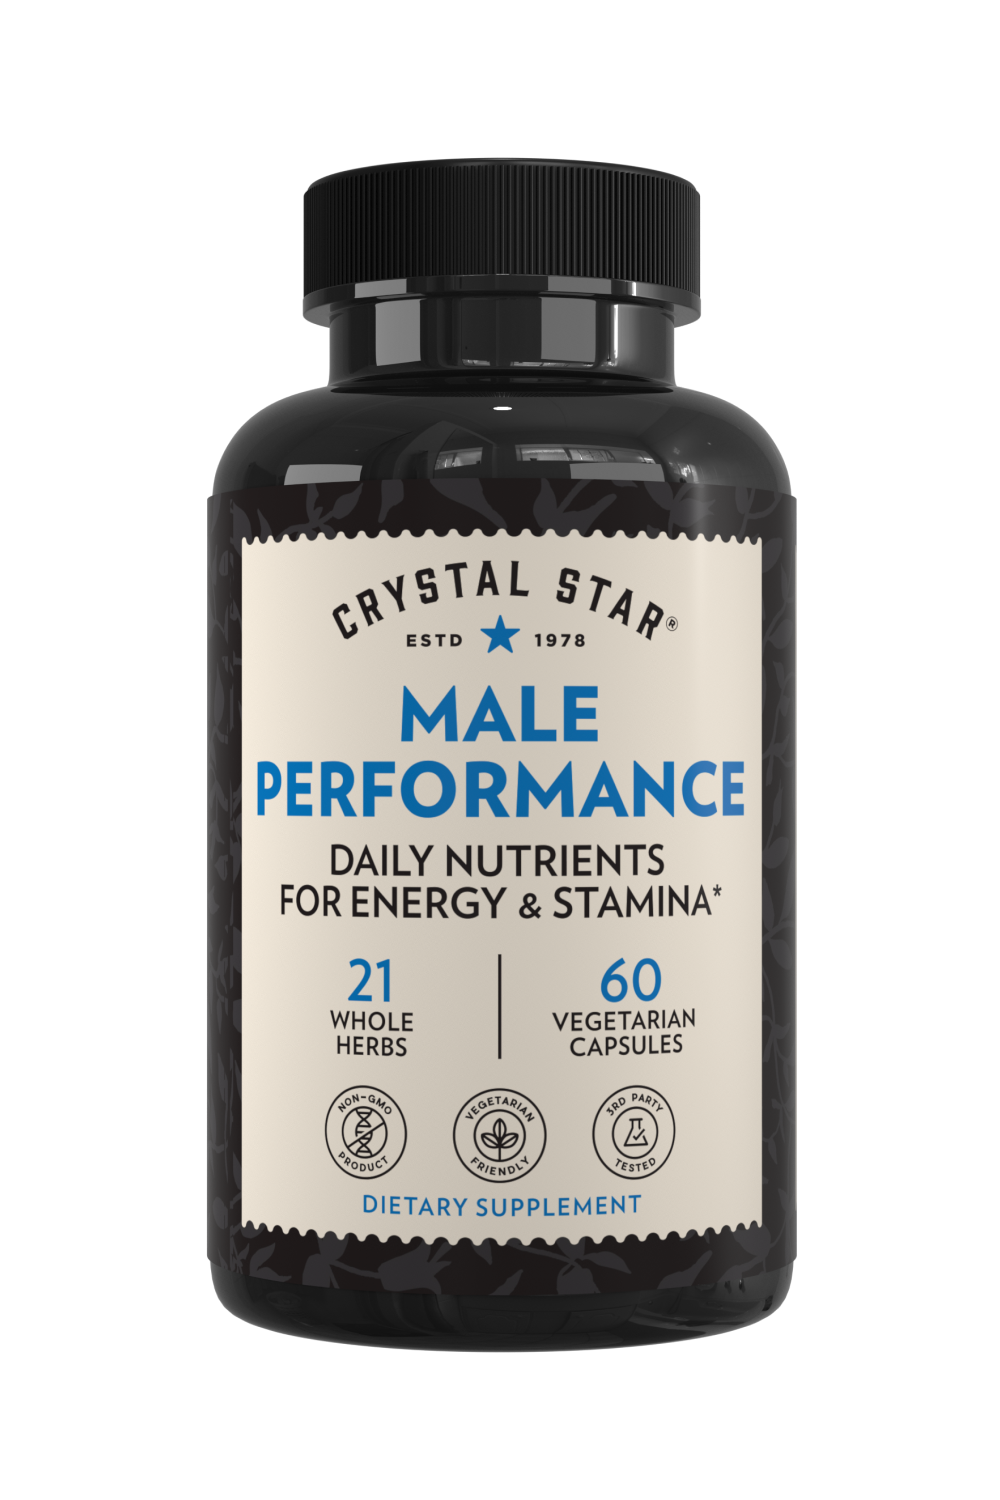 Crystal Star Male Performance supplement for energy and stamina, Front Side